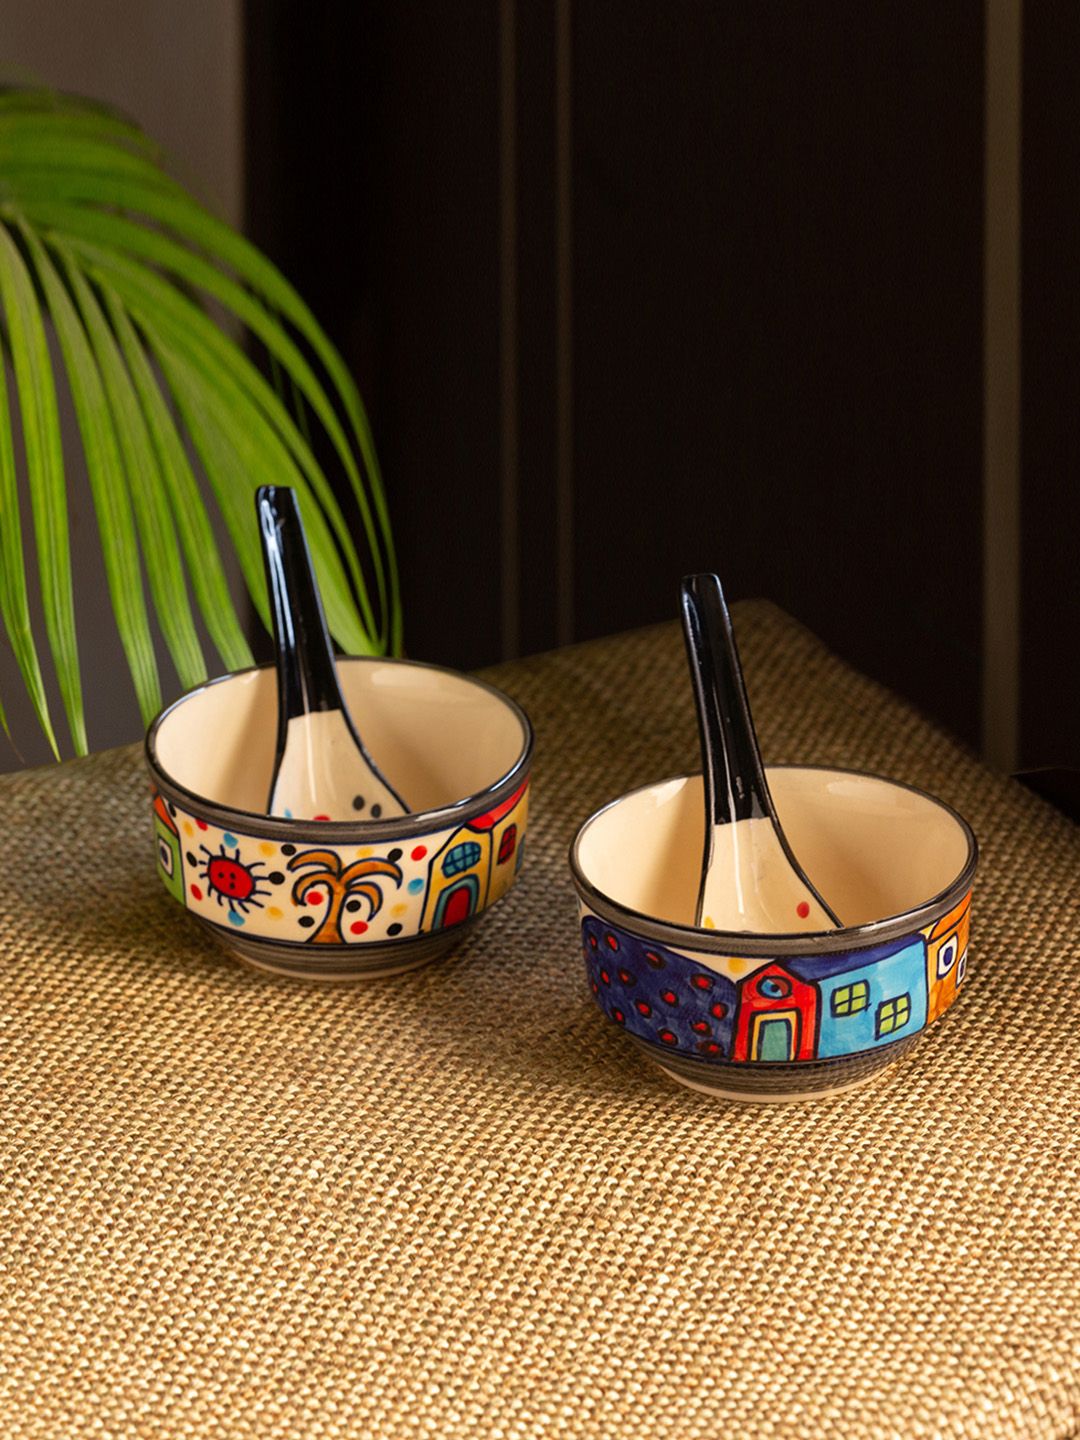 ExclusiveLane Set of 2 Cream-Coloured & Navy Blue Printed Ceramic Soup Bowl With Spoon Price in India